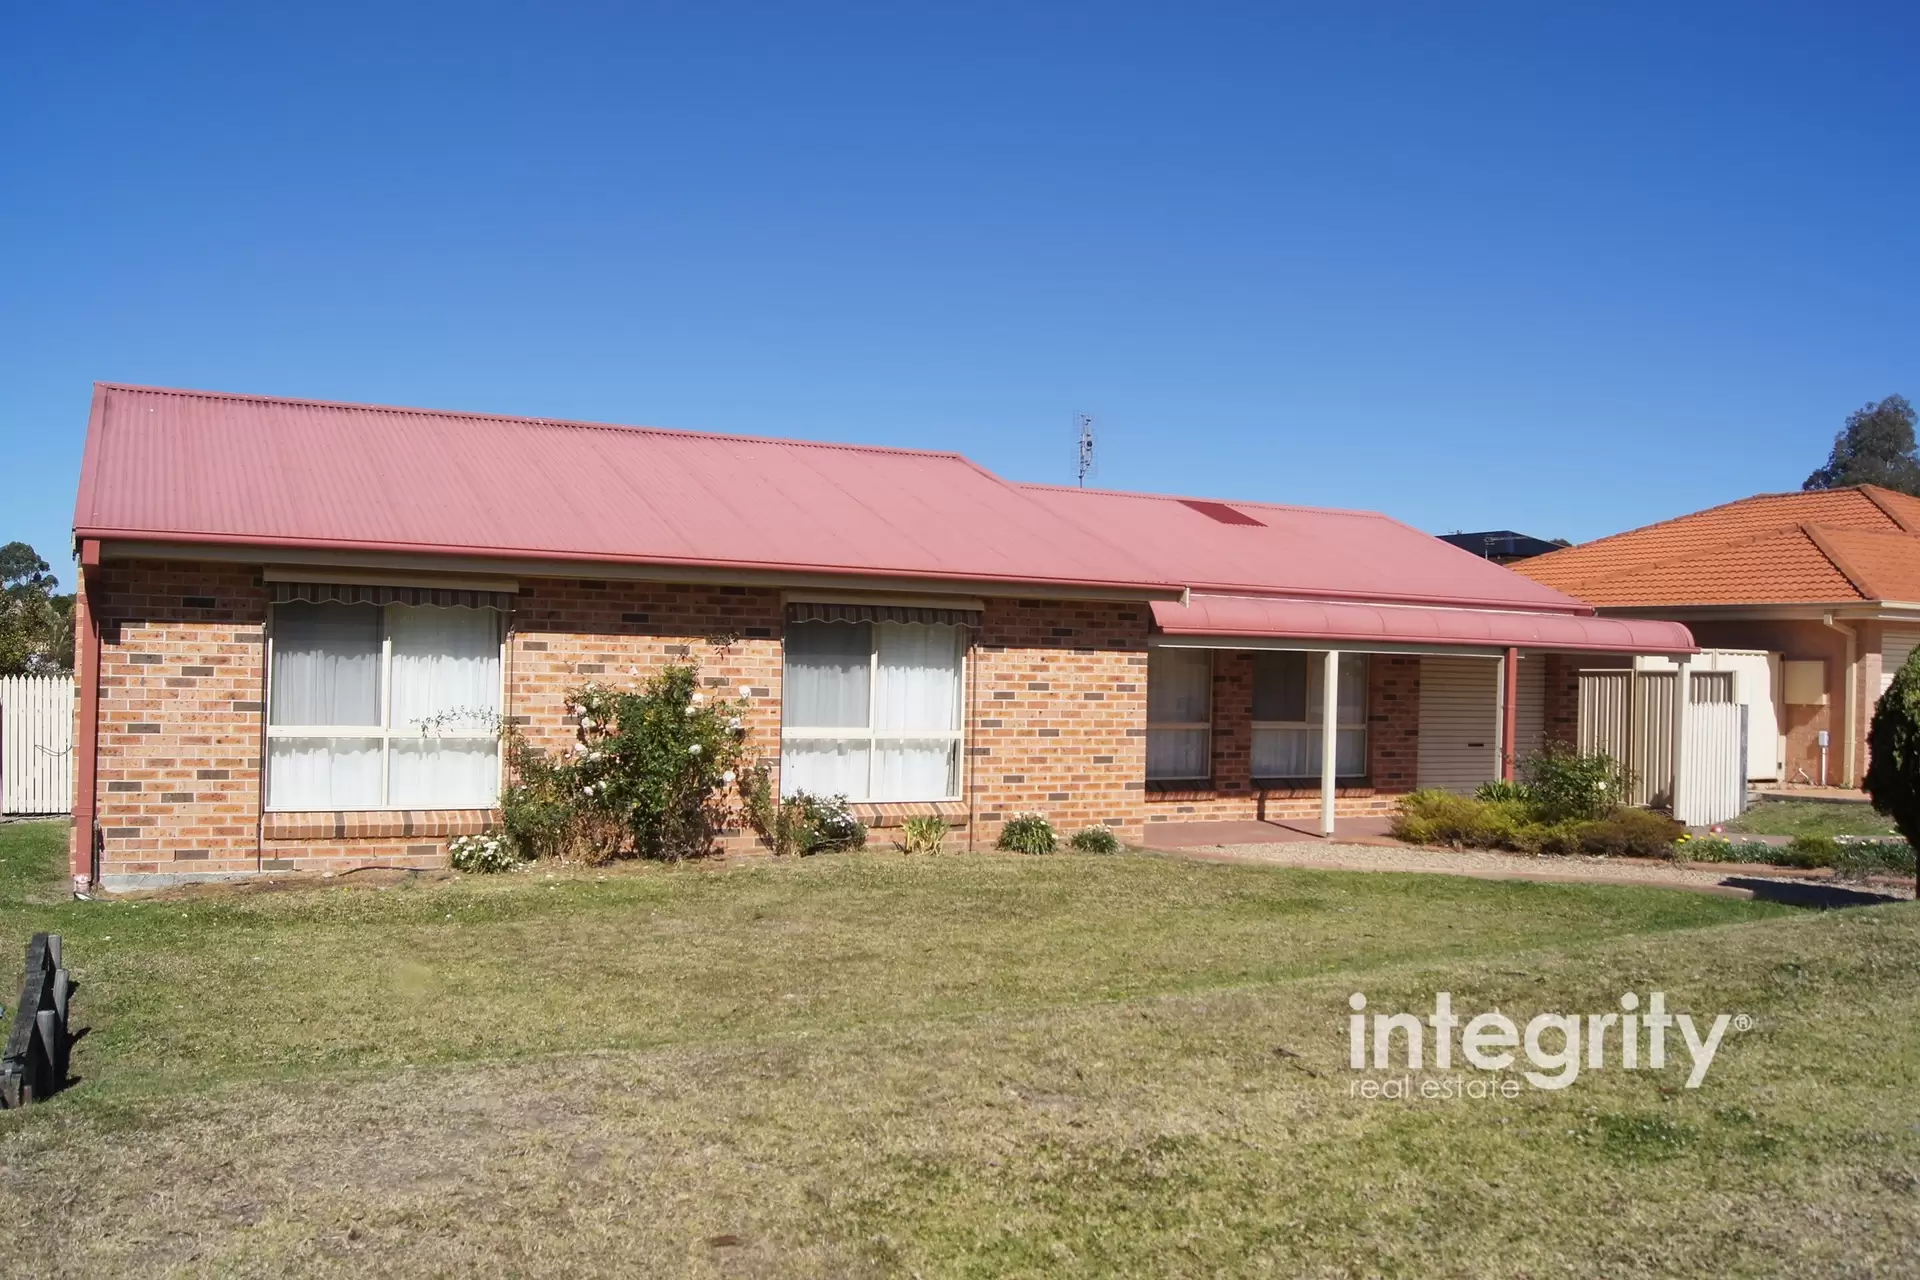 20 Isa Road, Worrigee For Lease by Integrity Real Estate